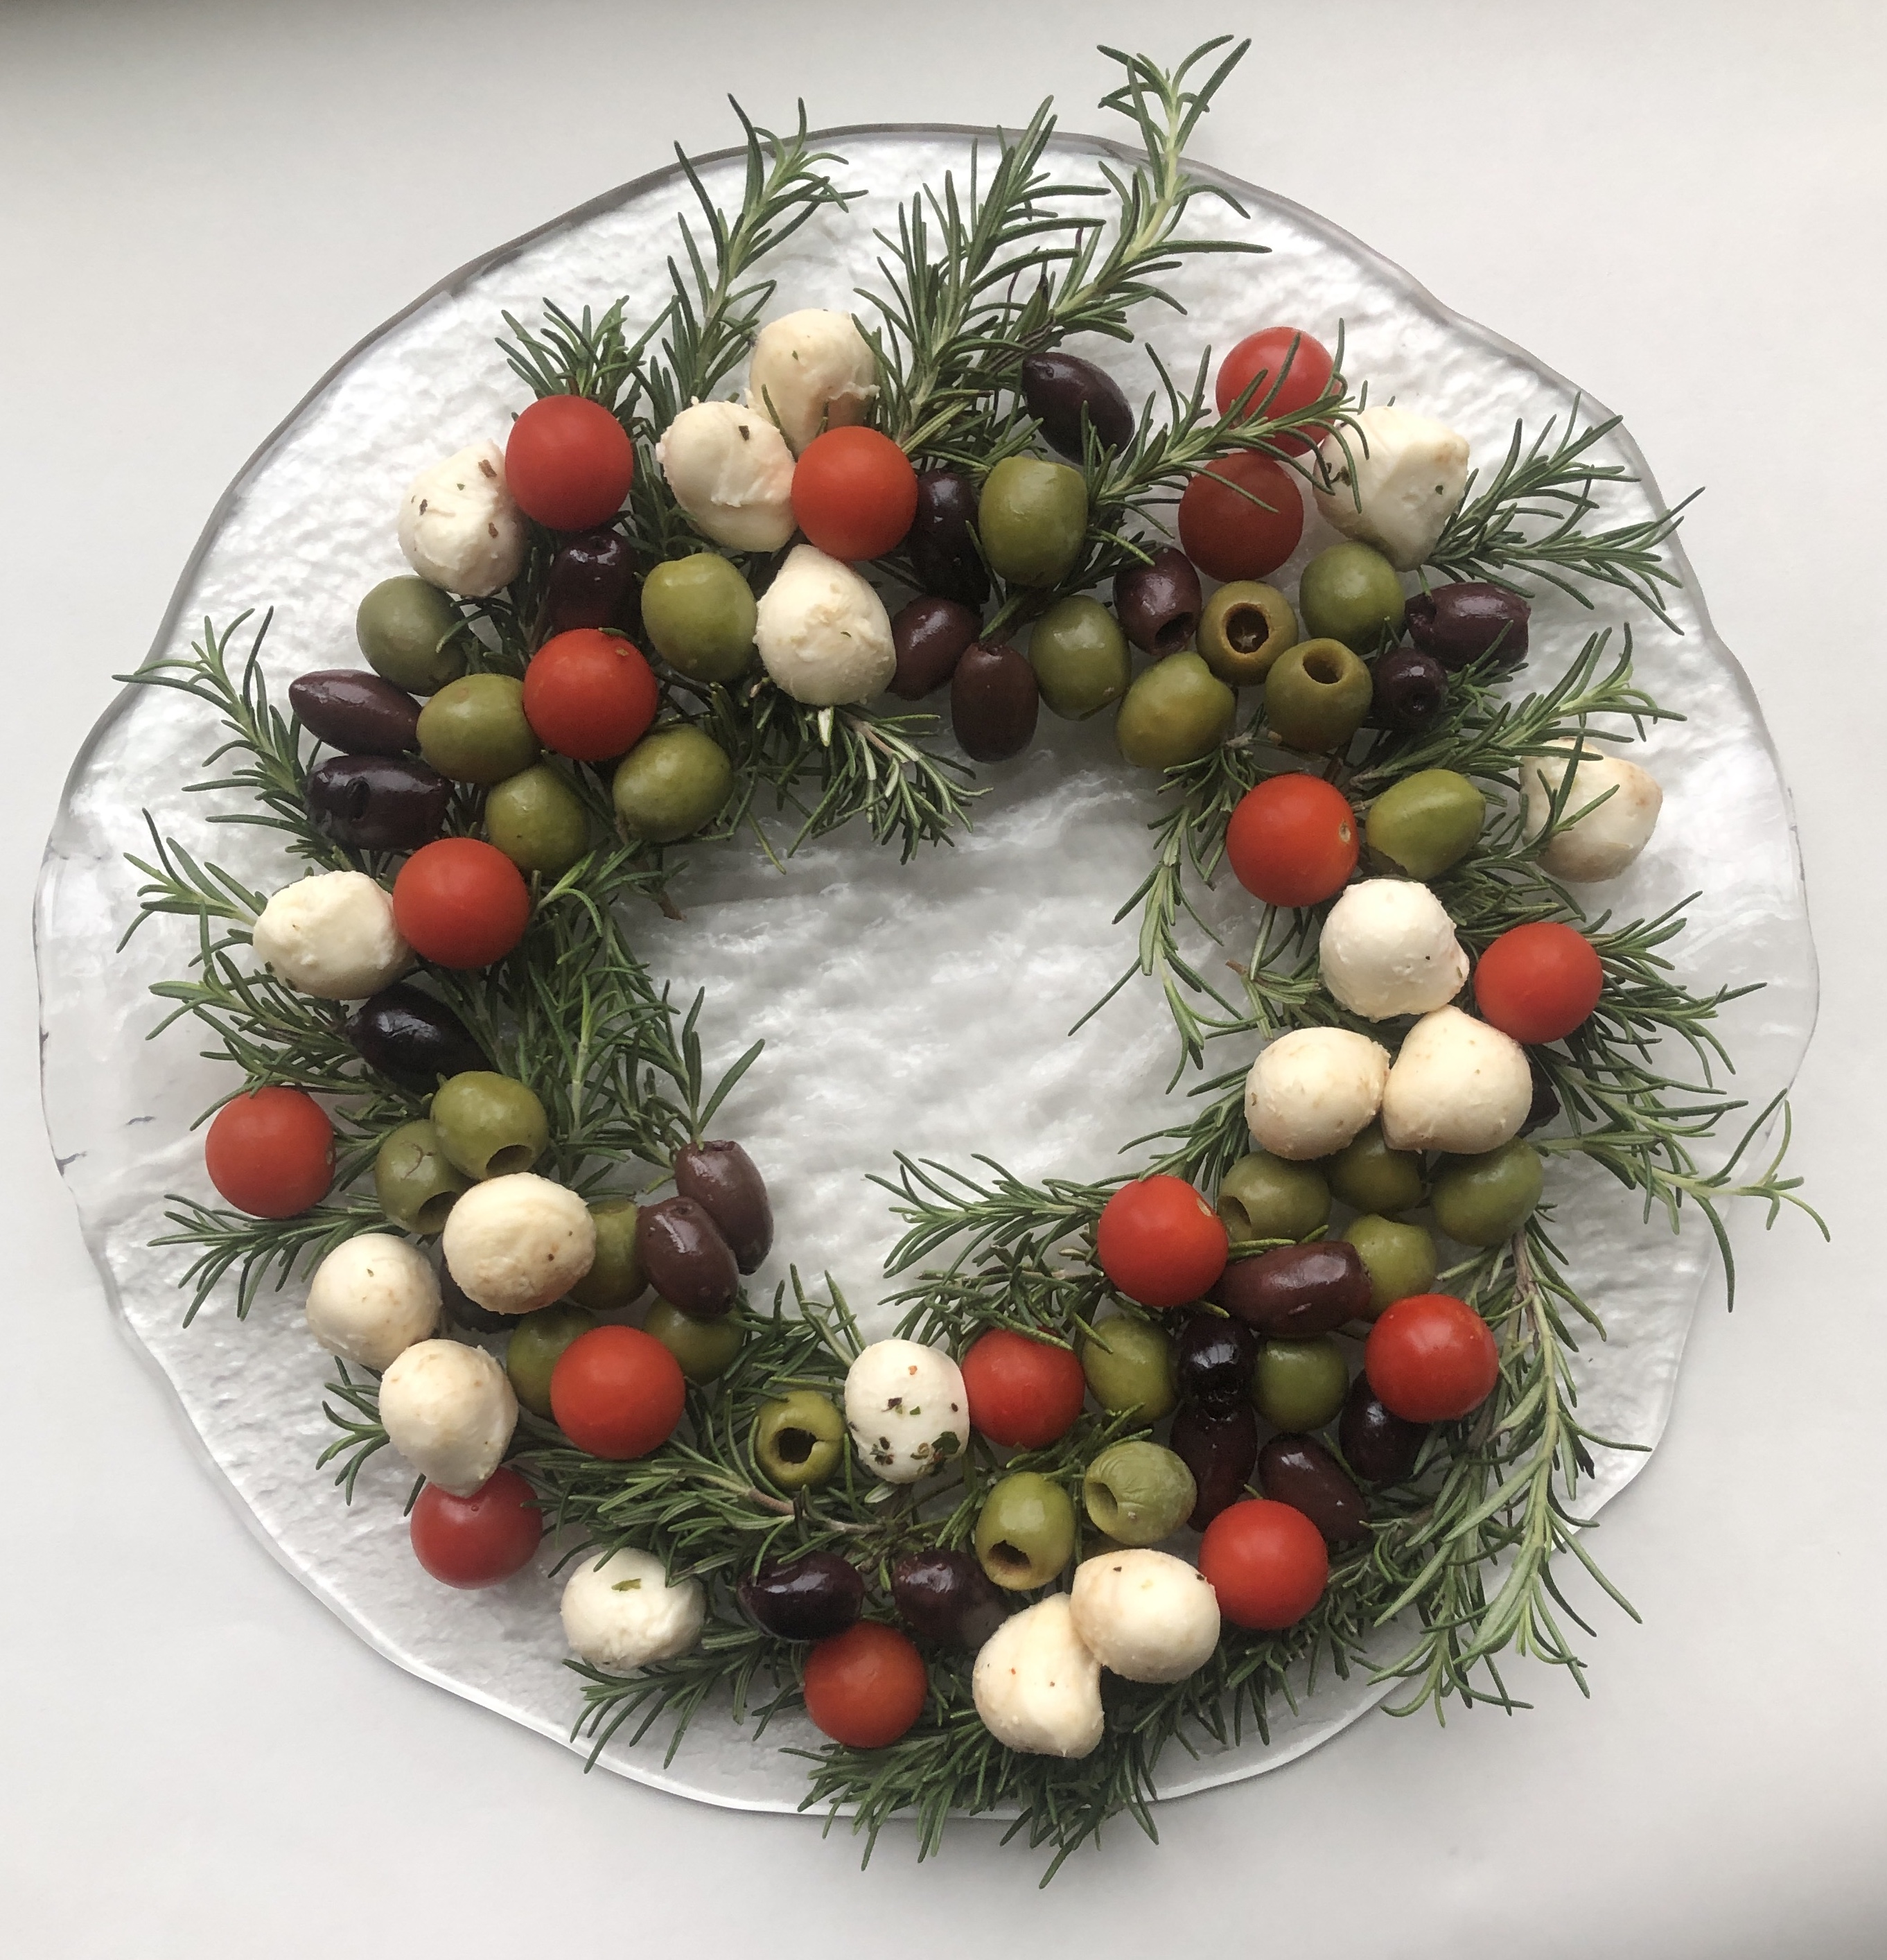 Festive Olive and Cheese Appetizer